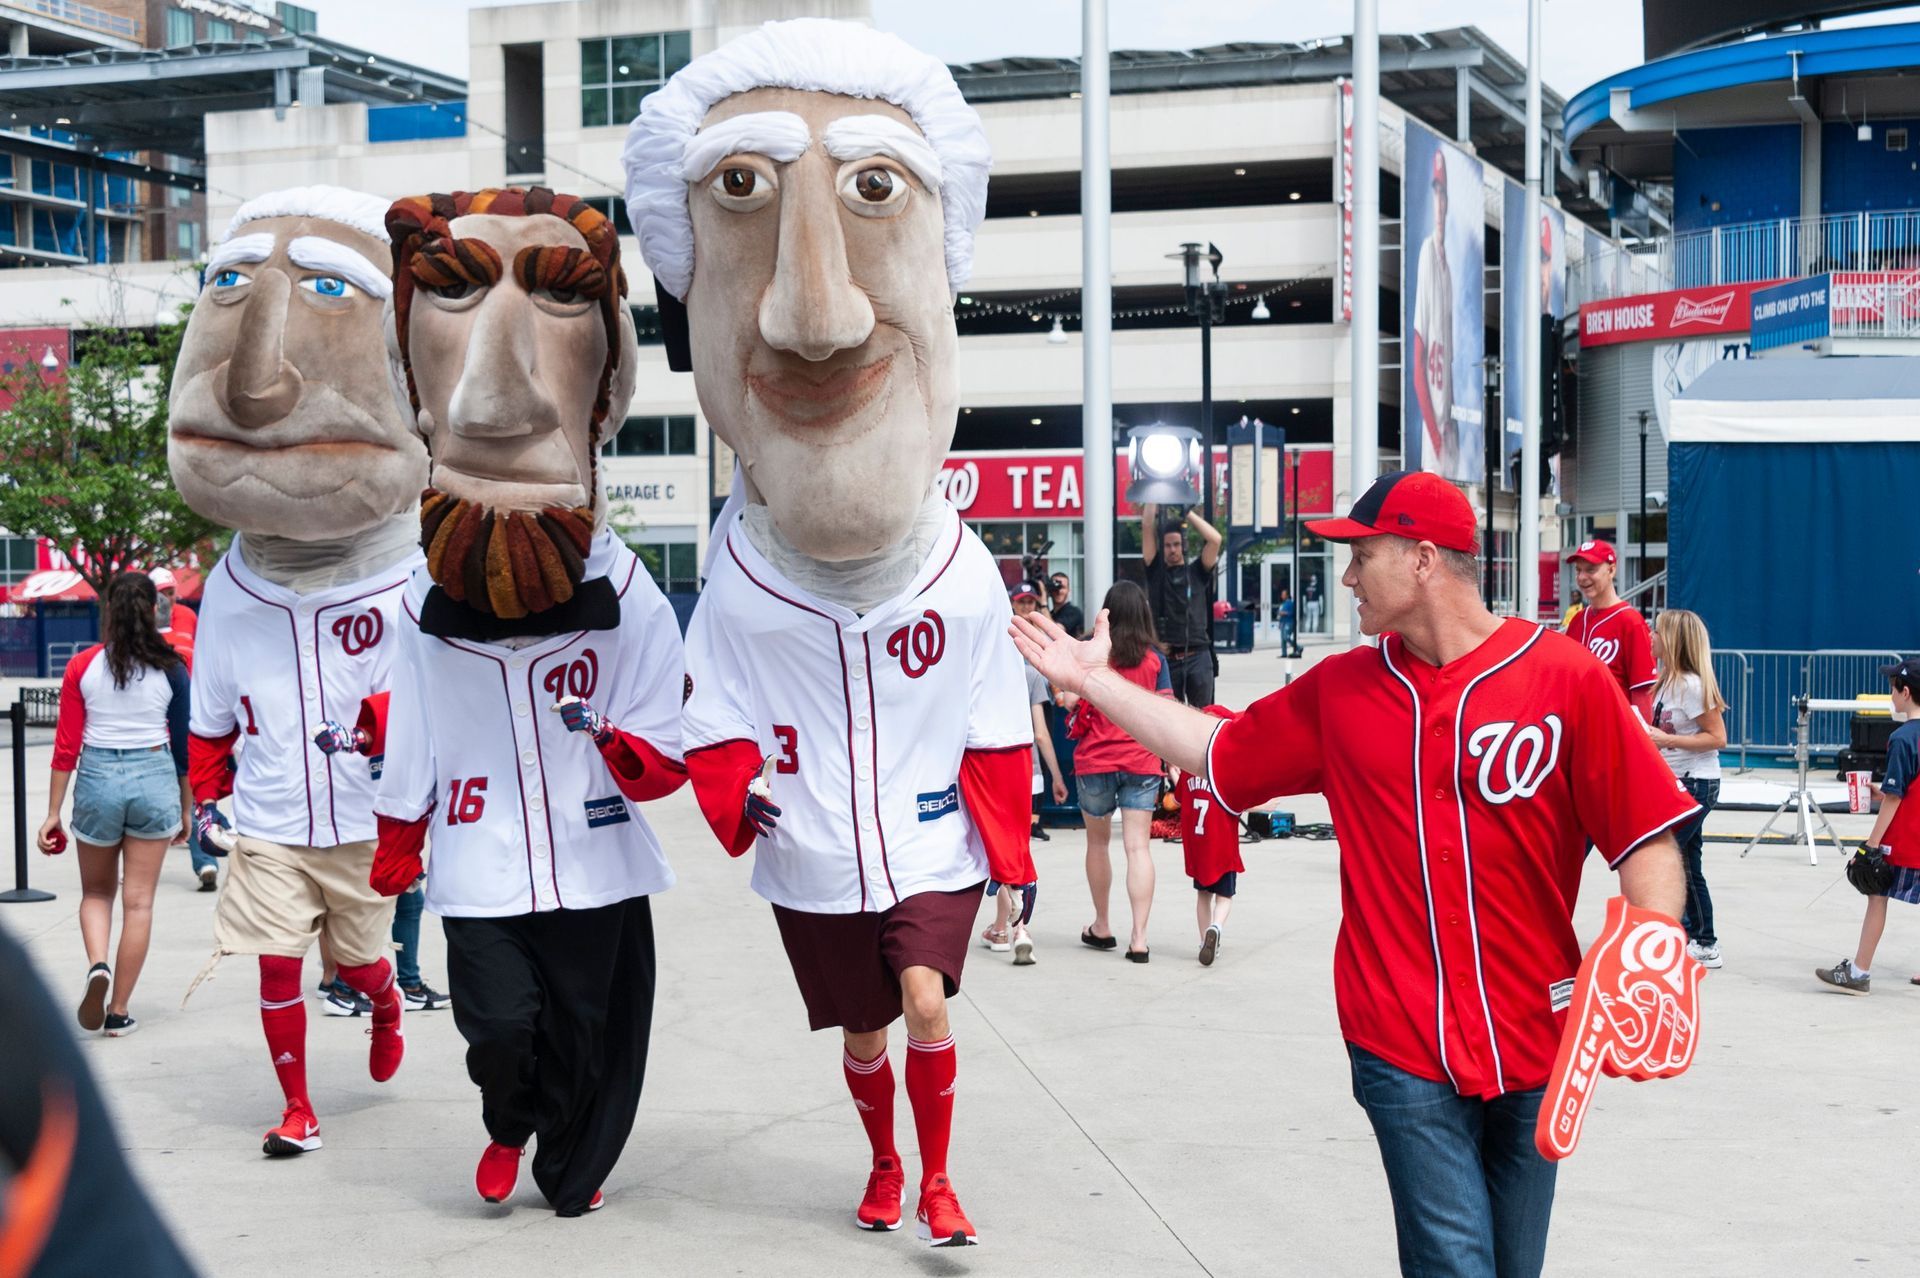 A man in a washington nationals jersey is walking with a group of mascots.